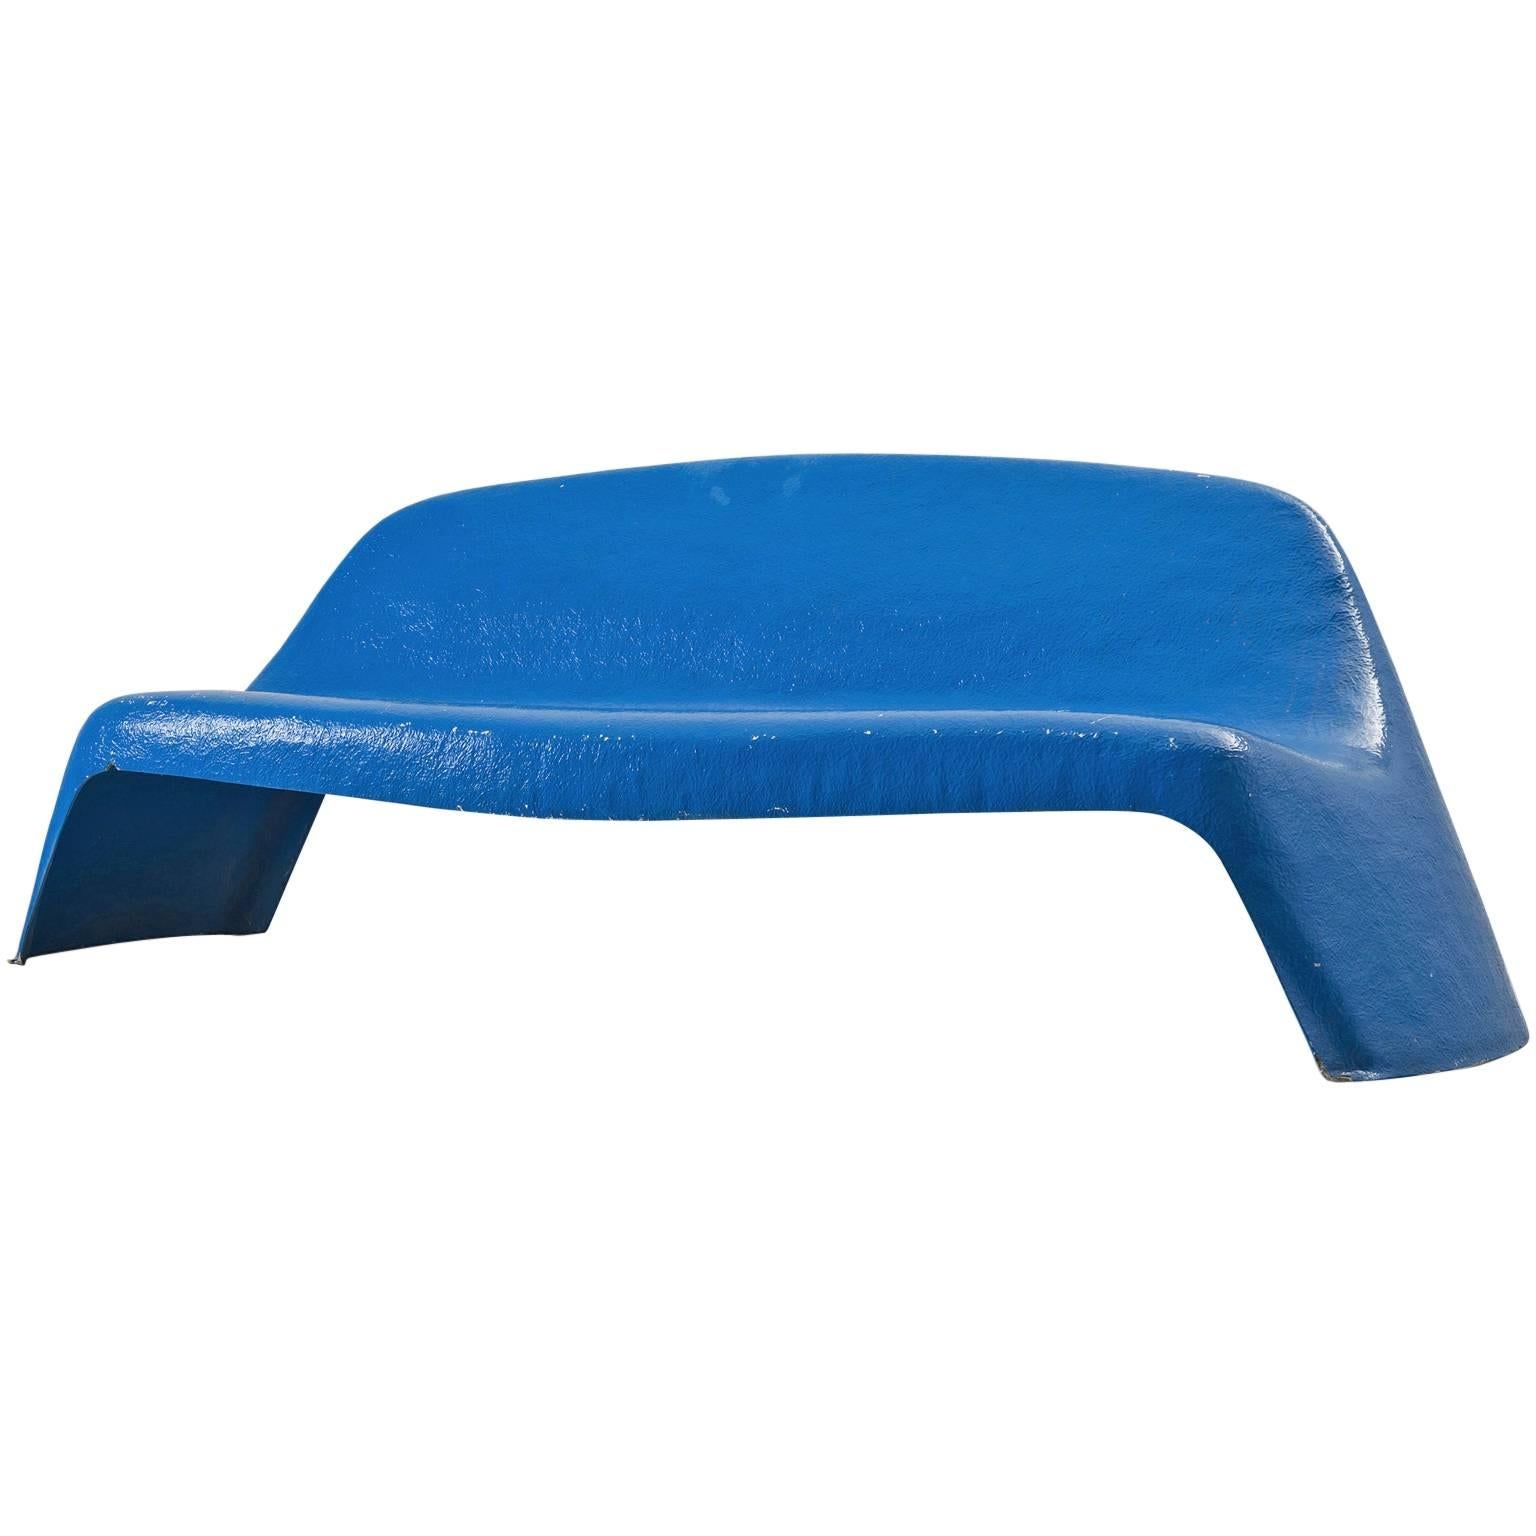 Walter Papst Blue Colored Bench for Wilkhahn